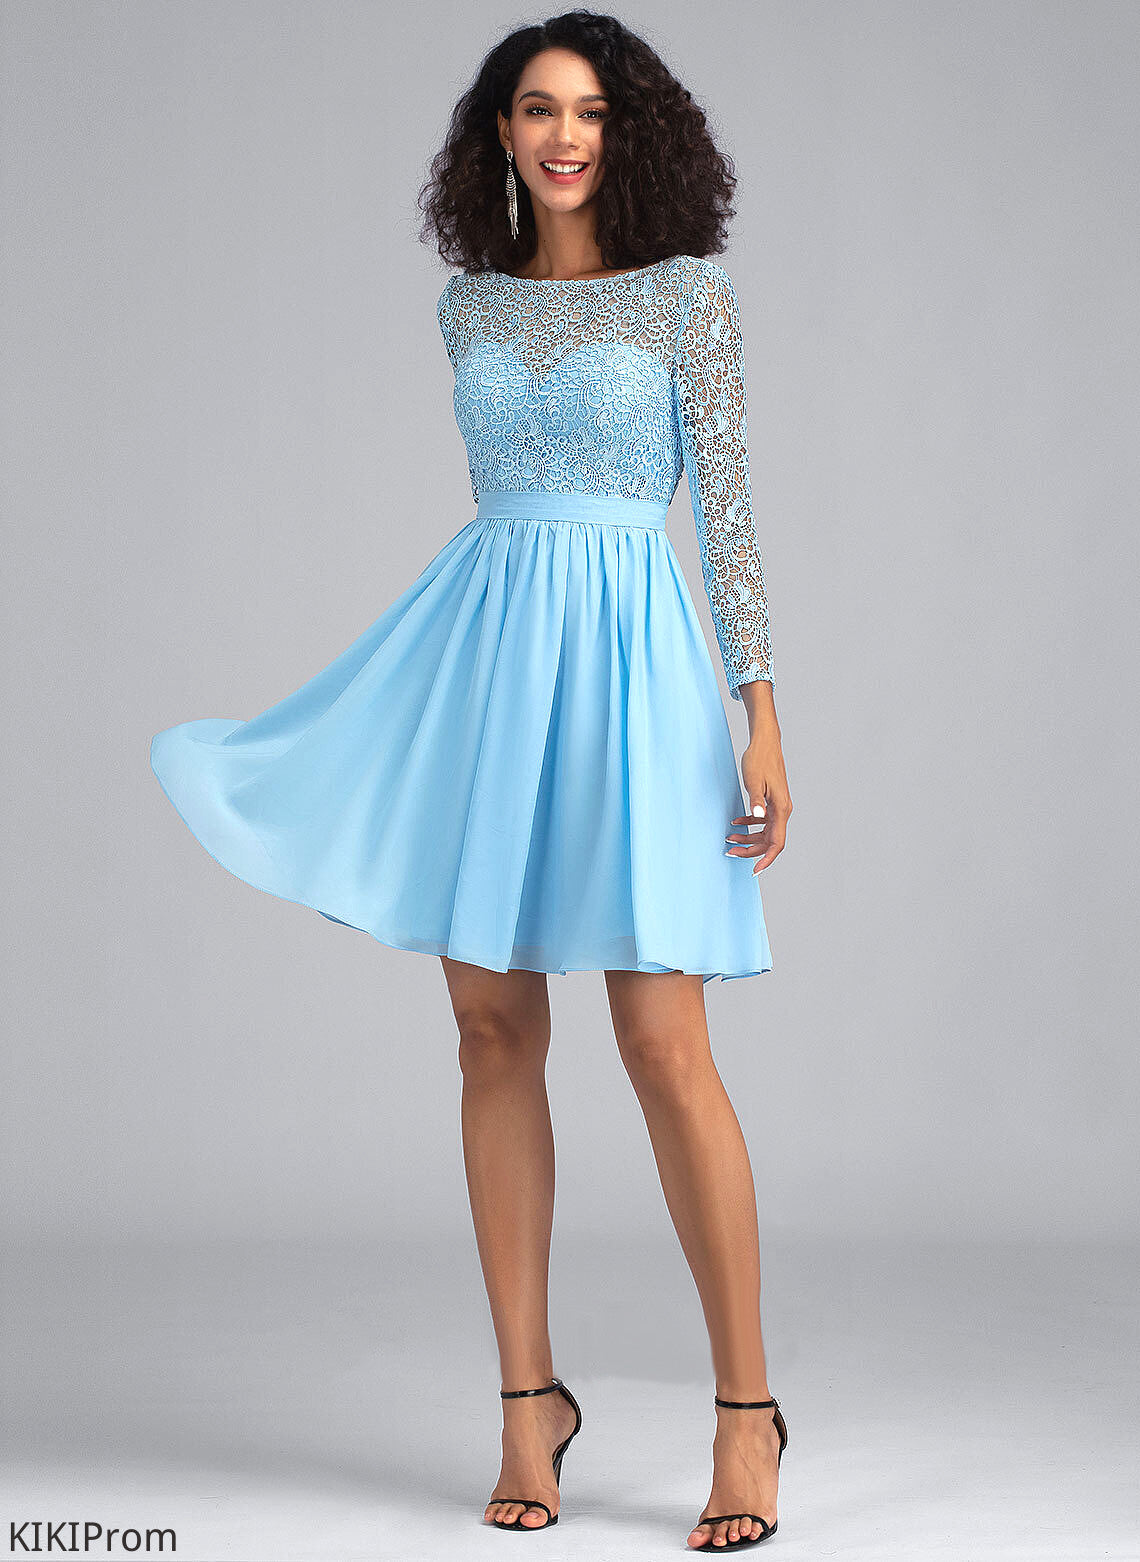 Chiffon With Giada Short/Mini Lace Homecoming Dresses A-Line Scoop Homecoming Dress Neck